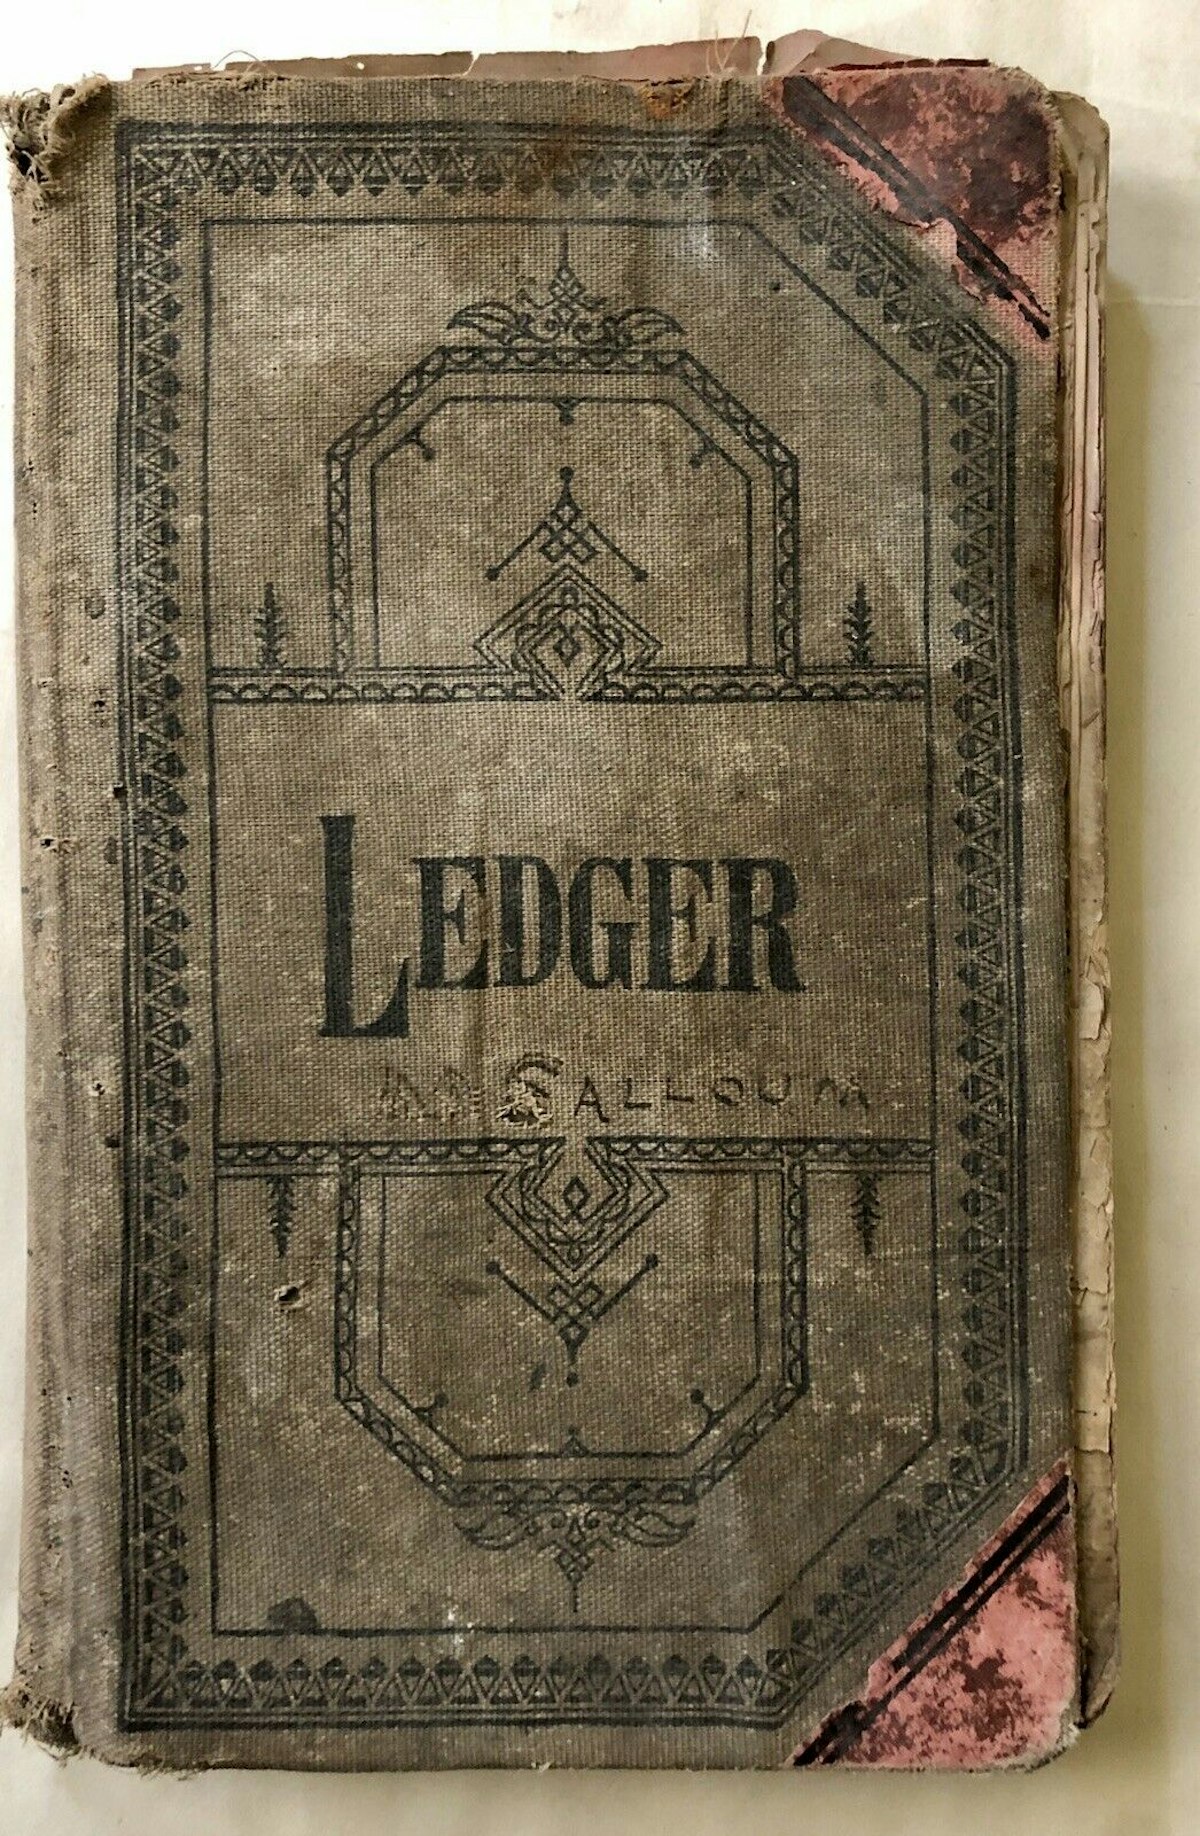 featured image - Distributed Ledgers: The Next Logical Step